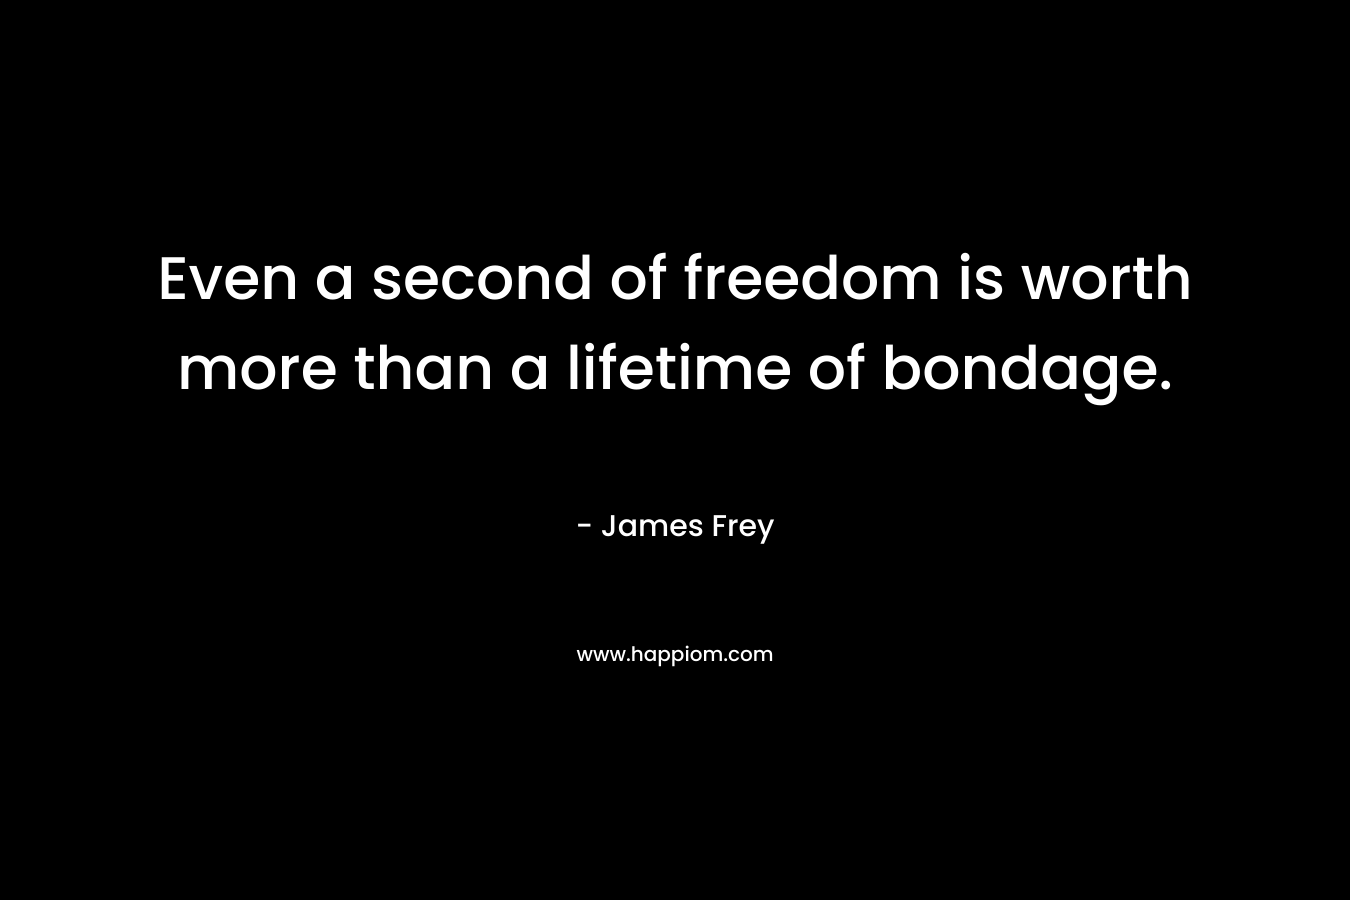 Even a second of freedom is worth more than a lifetime of bondage. – James Frey